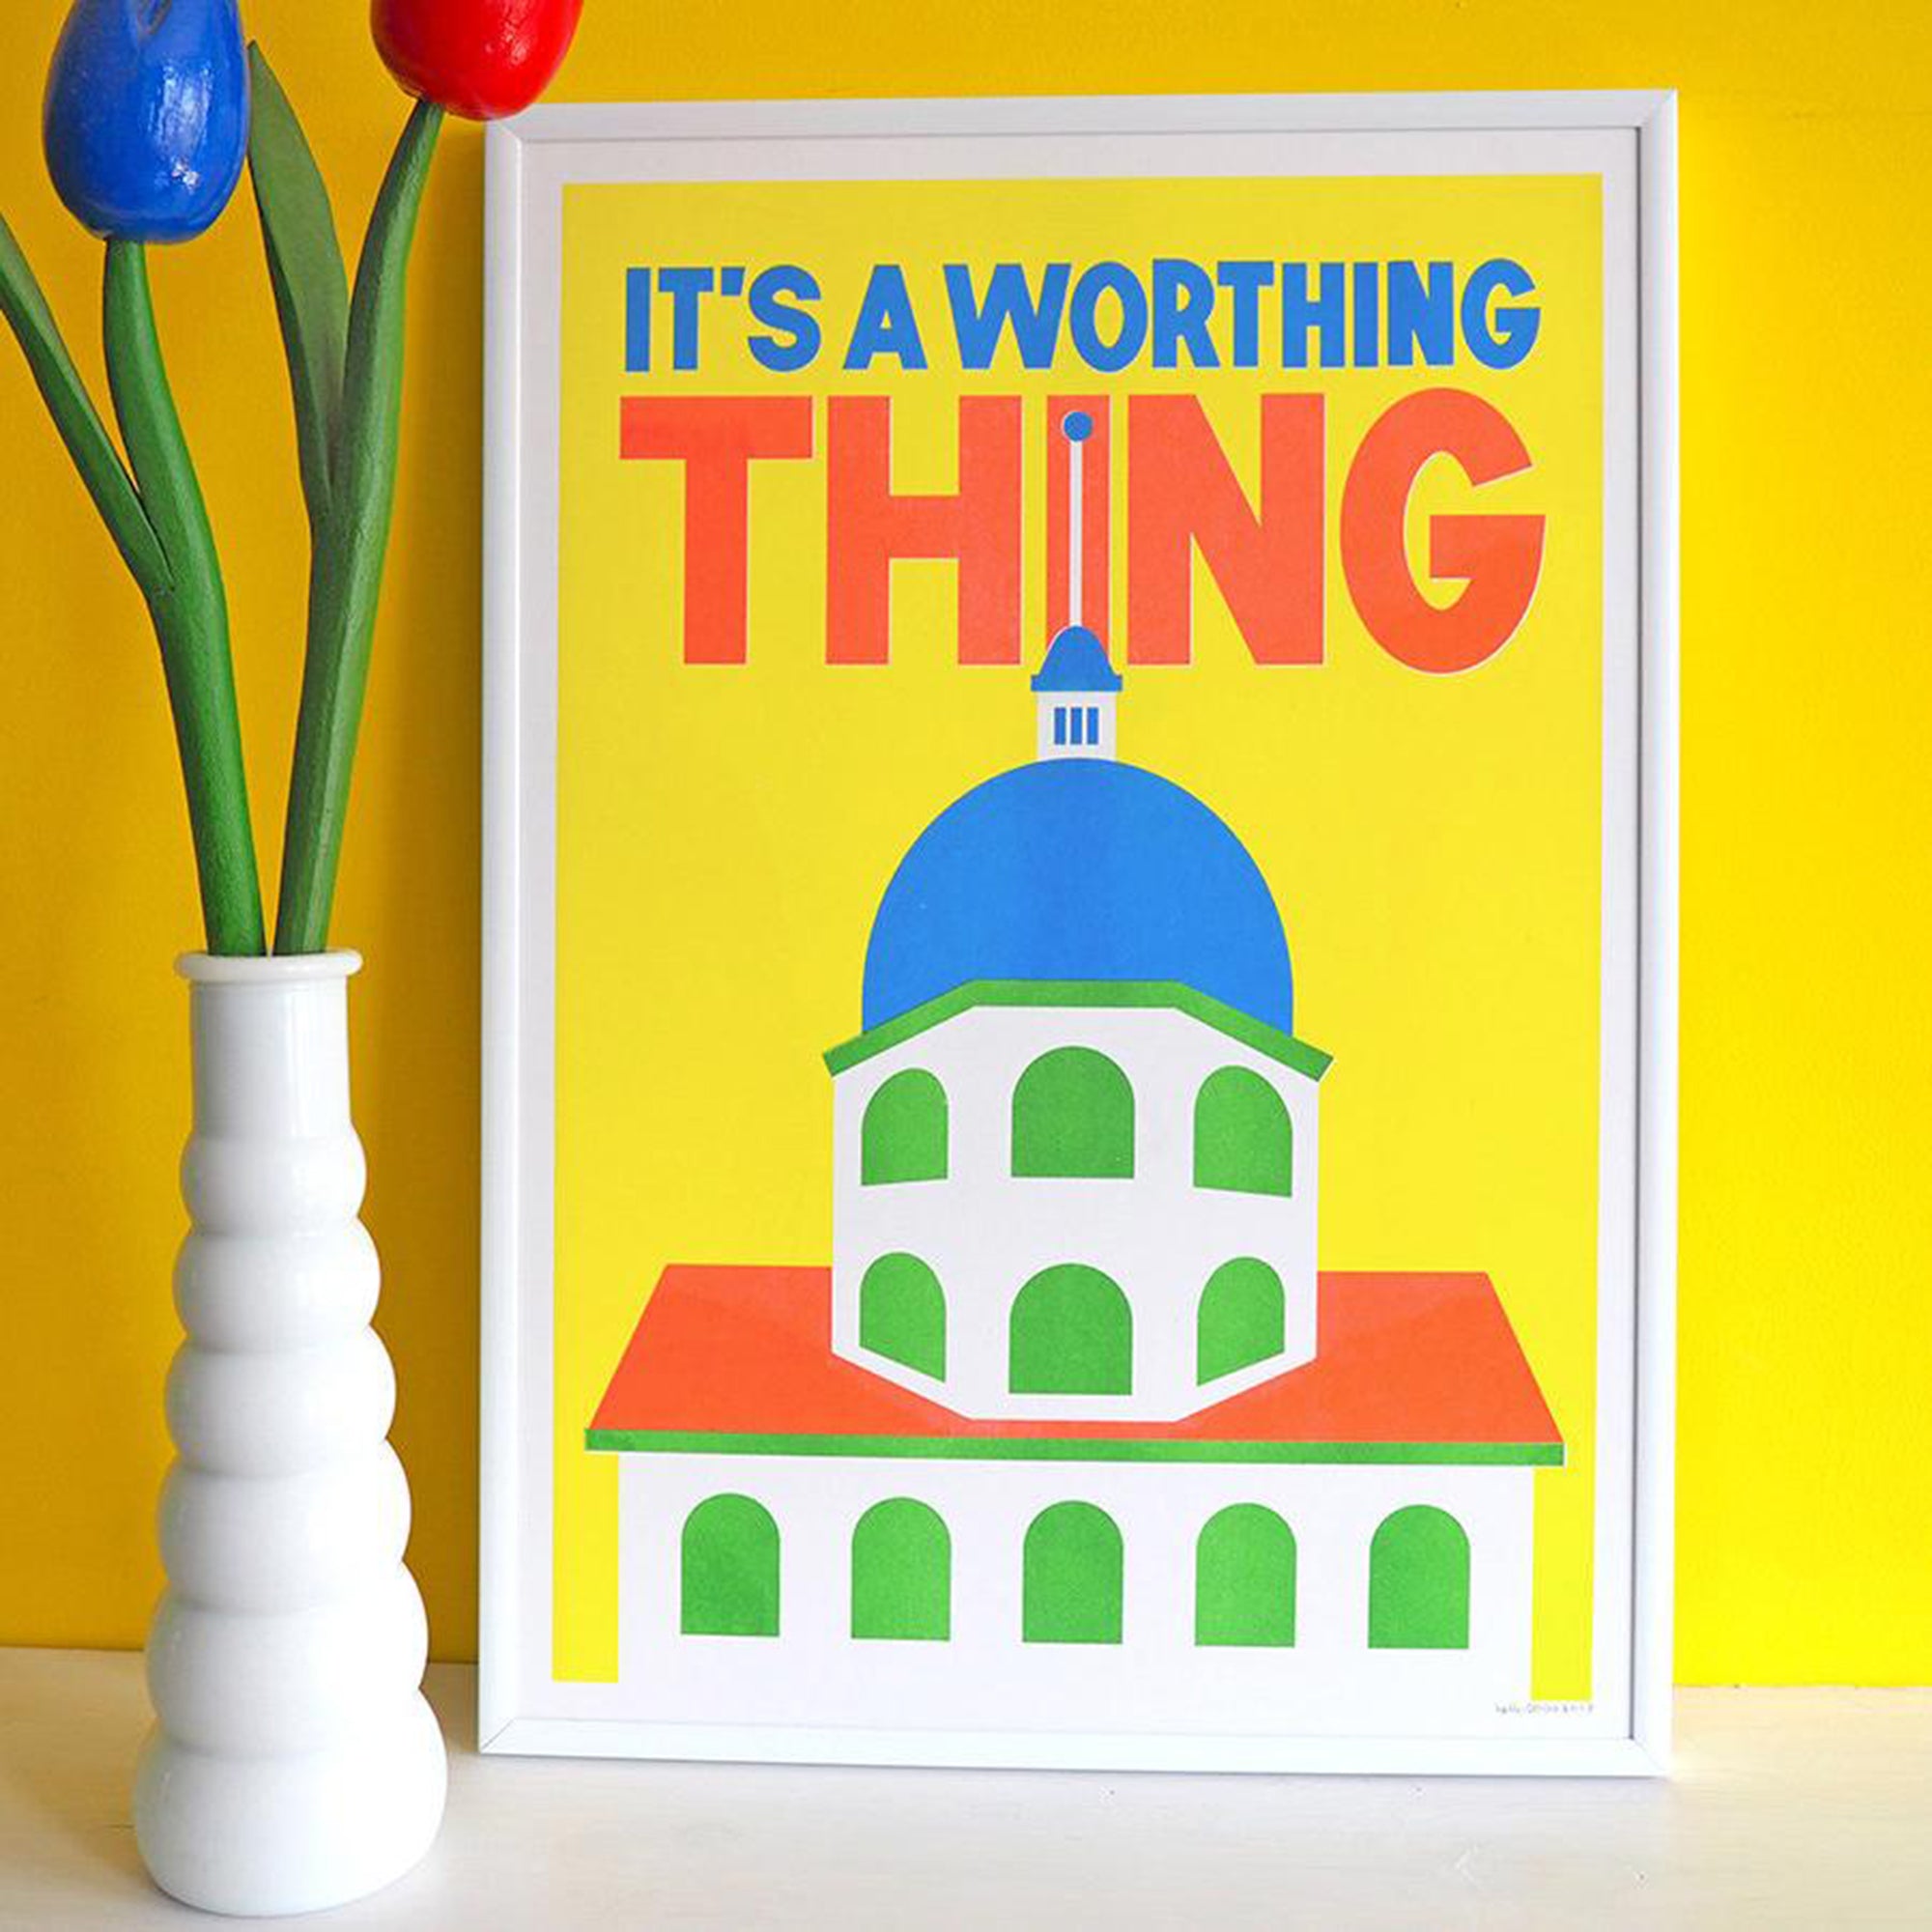 It's a Worthing thing riso print - Inspired 